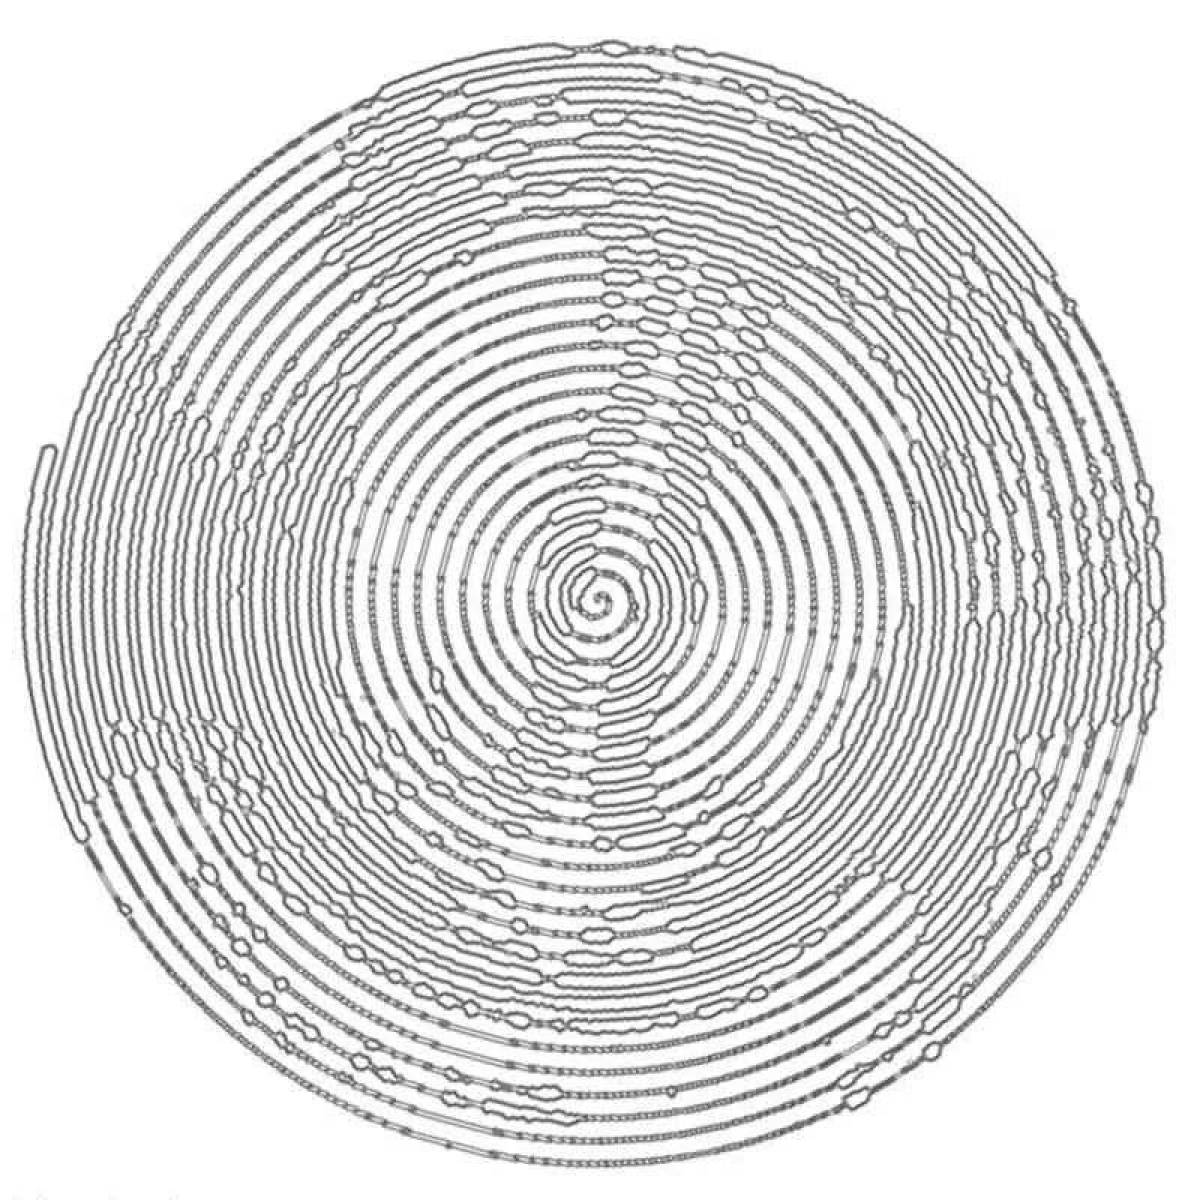 Intriguing circle with coloring lines